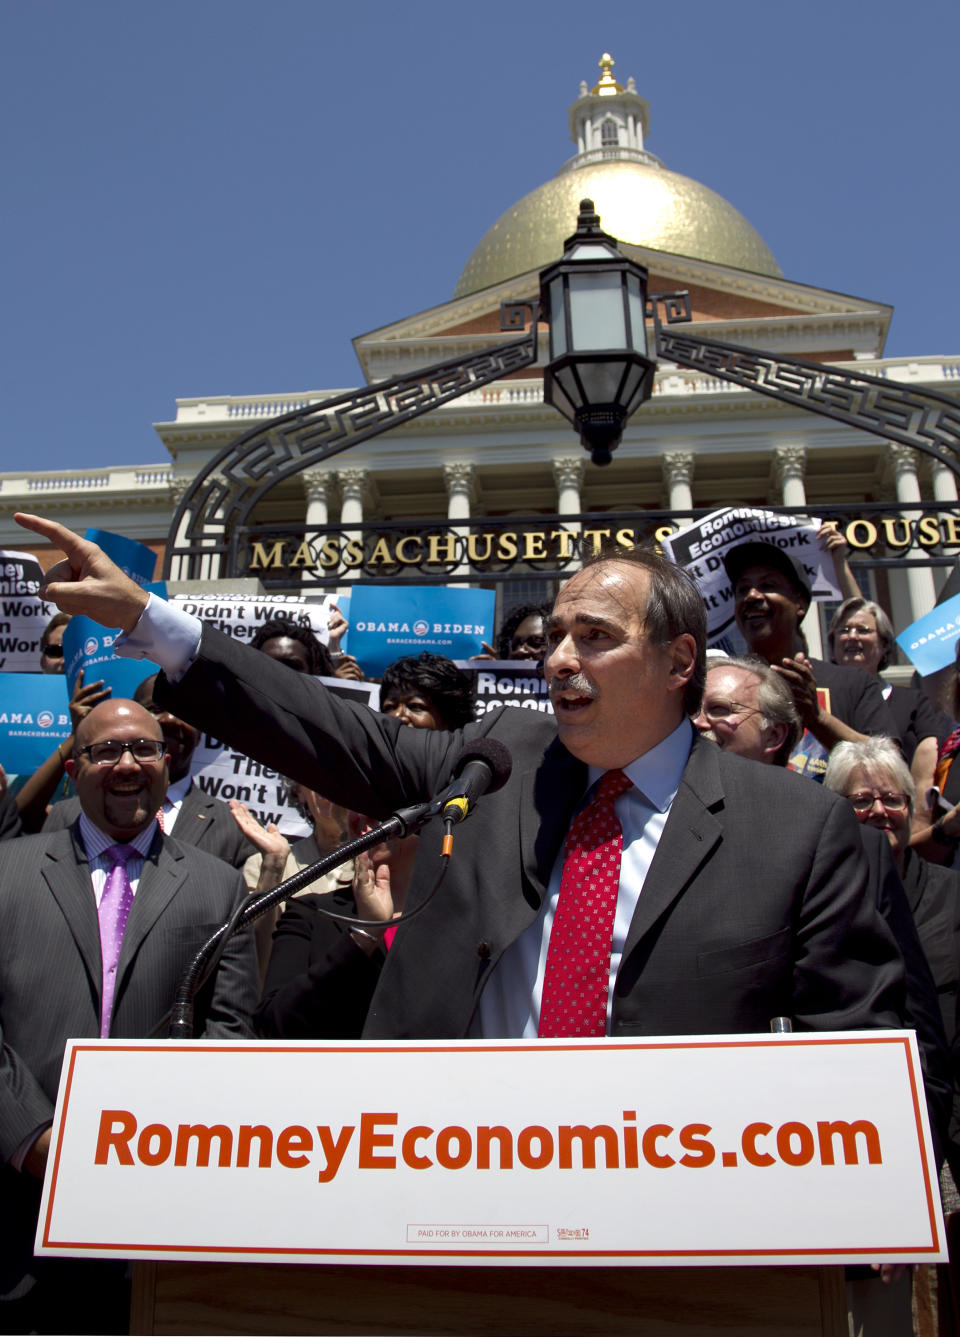 David Axelrod, a strategist for President Obama, addresses a crowd in front of the Statehouse, in Boston Thursday, May 31, 2012. Axelrod criticized former Mass. Gov. and Republican Presidential candidate Mitt Romney's record as governor of the state during his remarks. (AP Photo/Steven Senne)